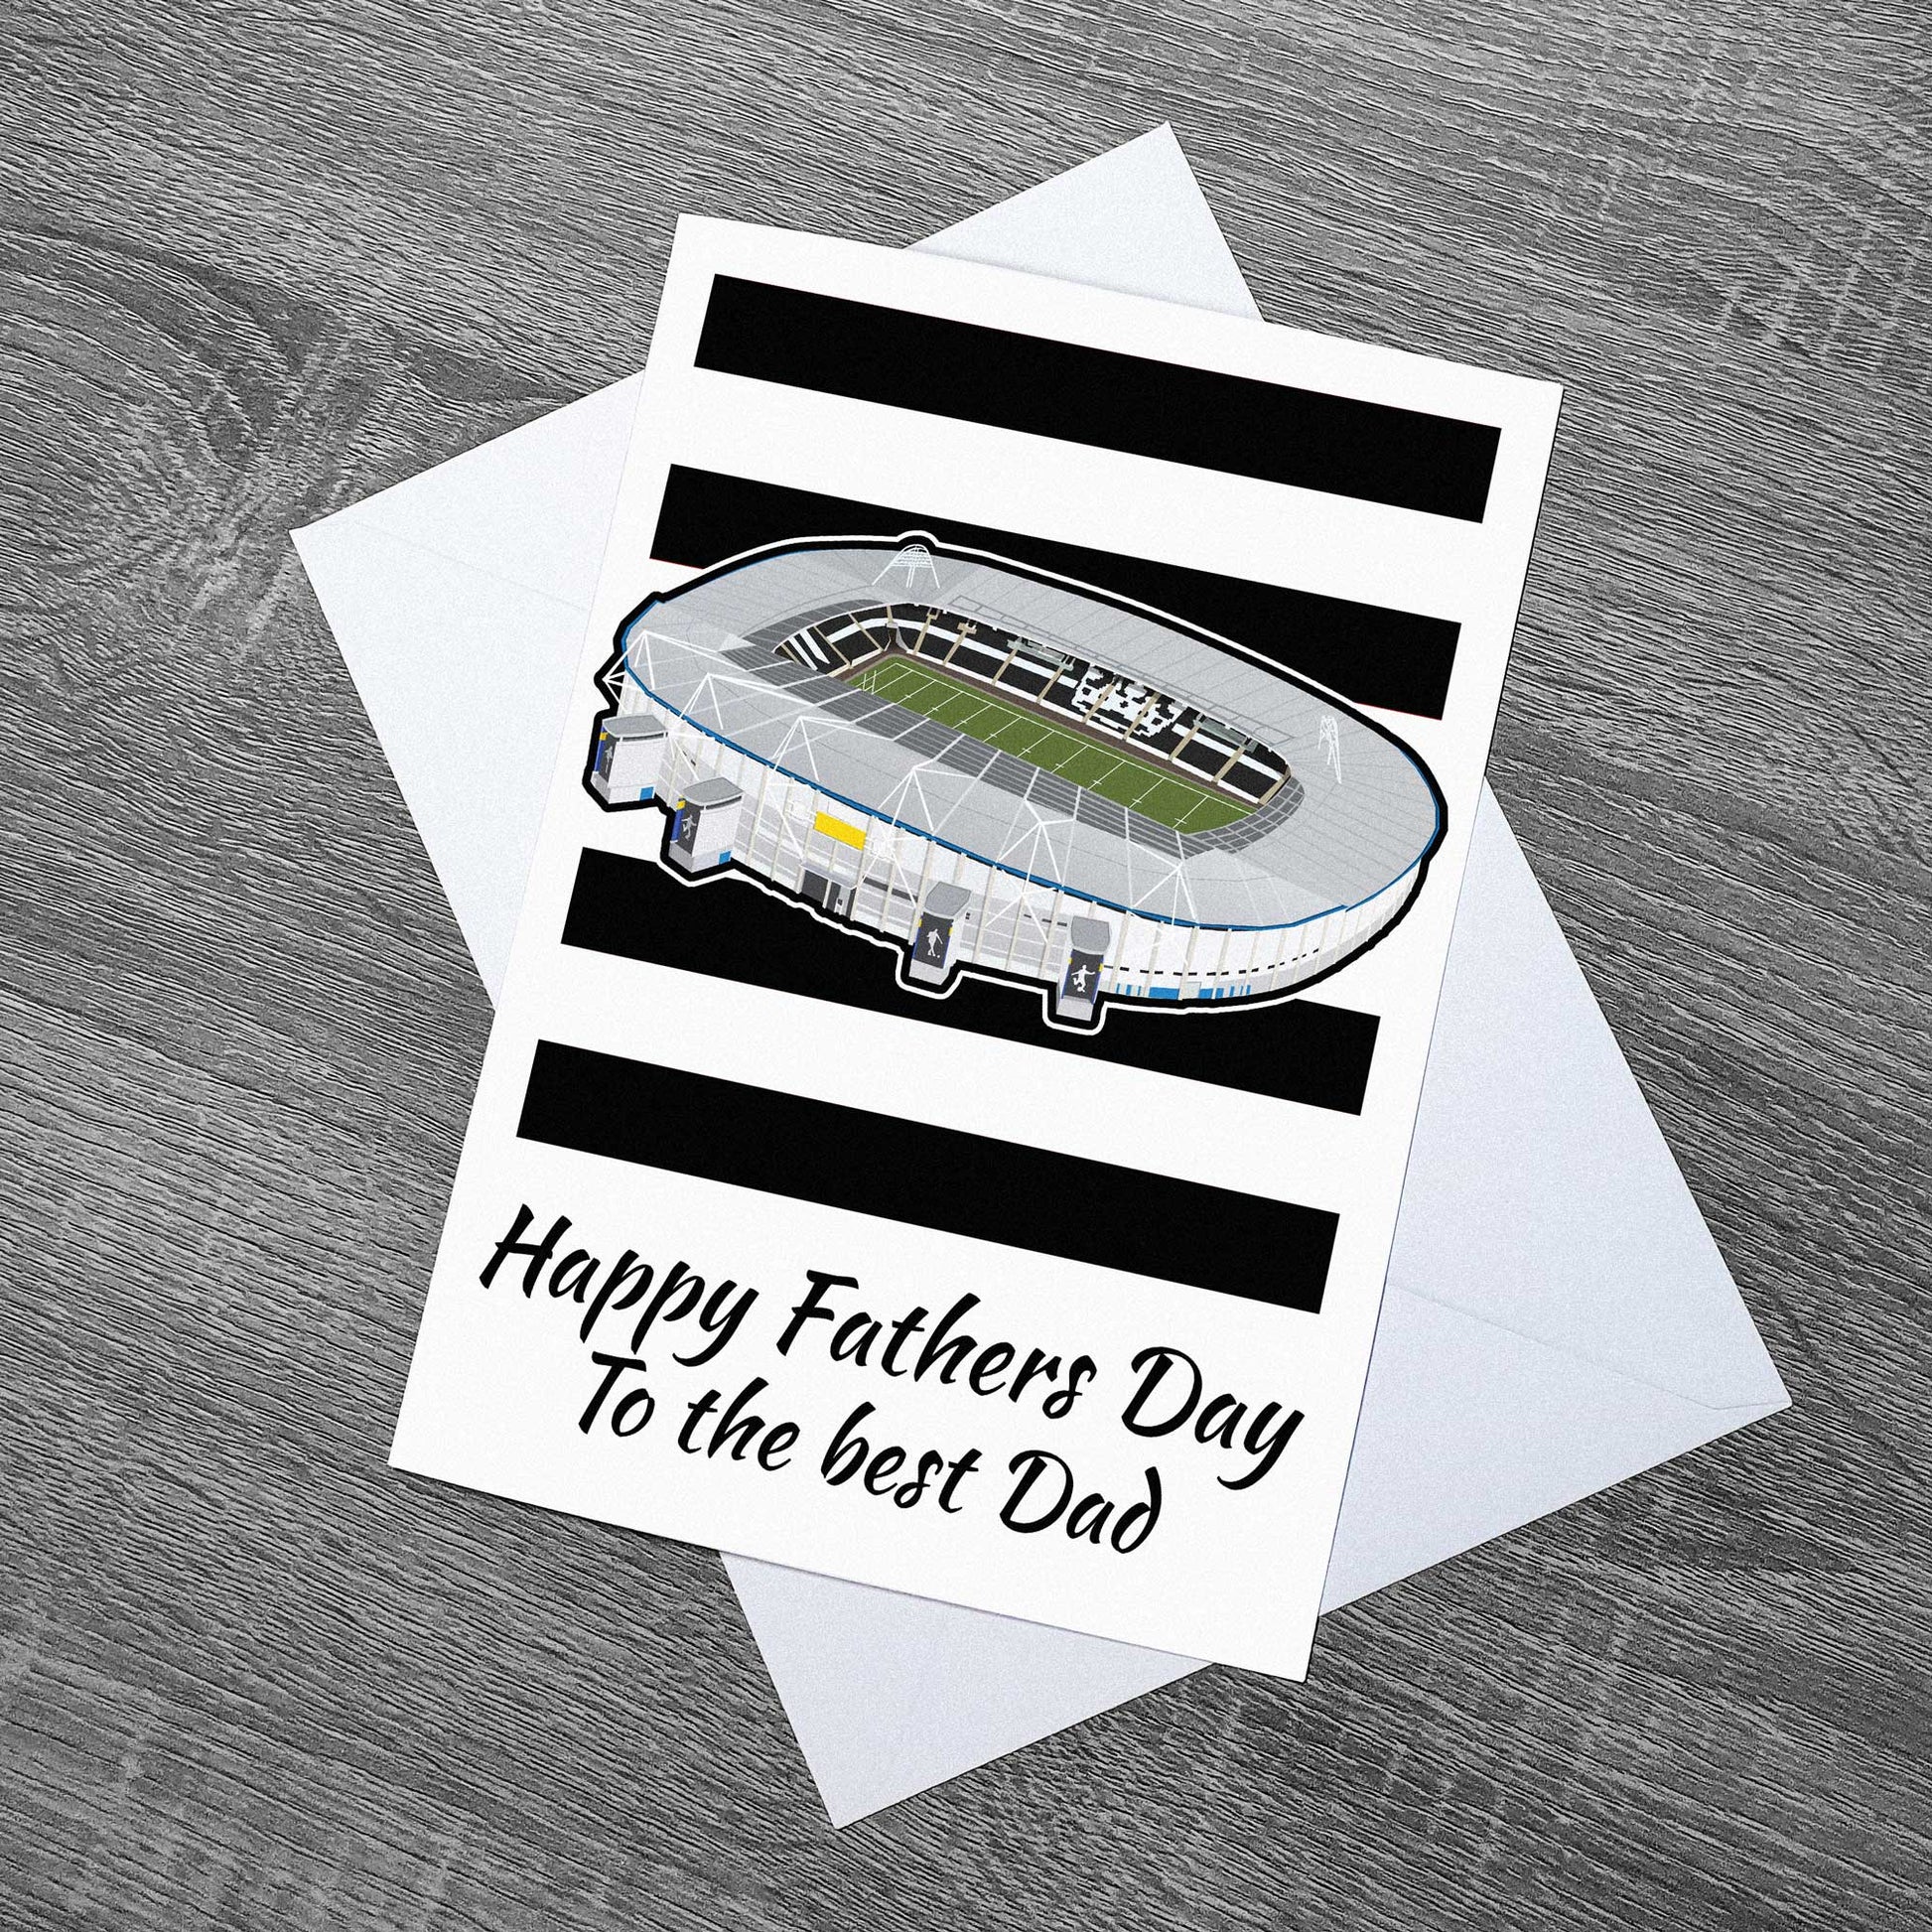 Inspired by the home of Hull FC in East Yorkshire, this is a fathers day card with artwork of the MKM Stadium on it!